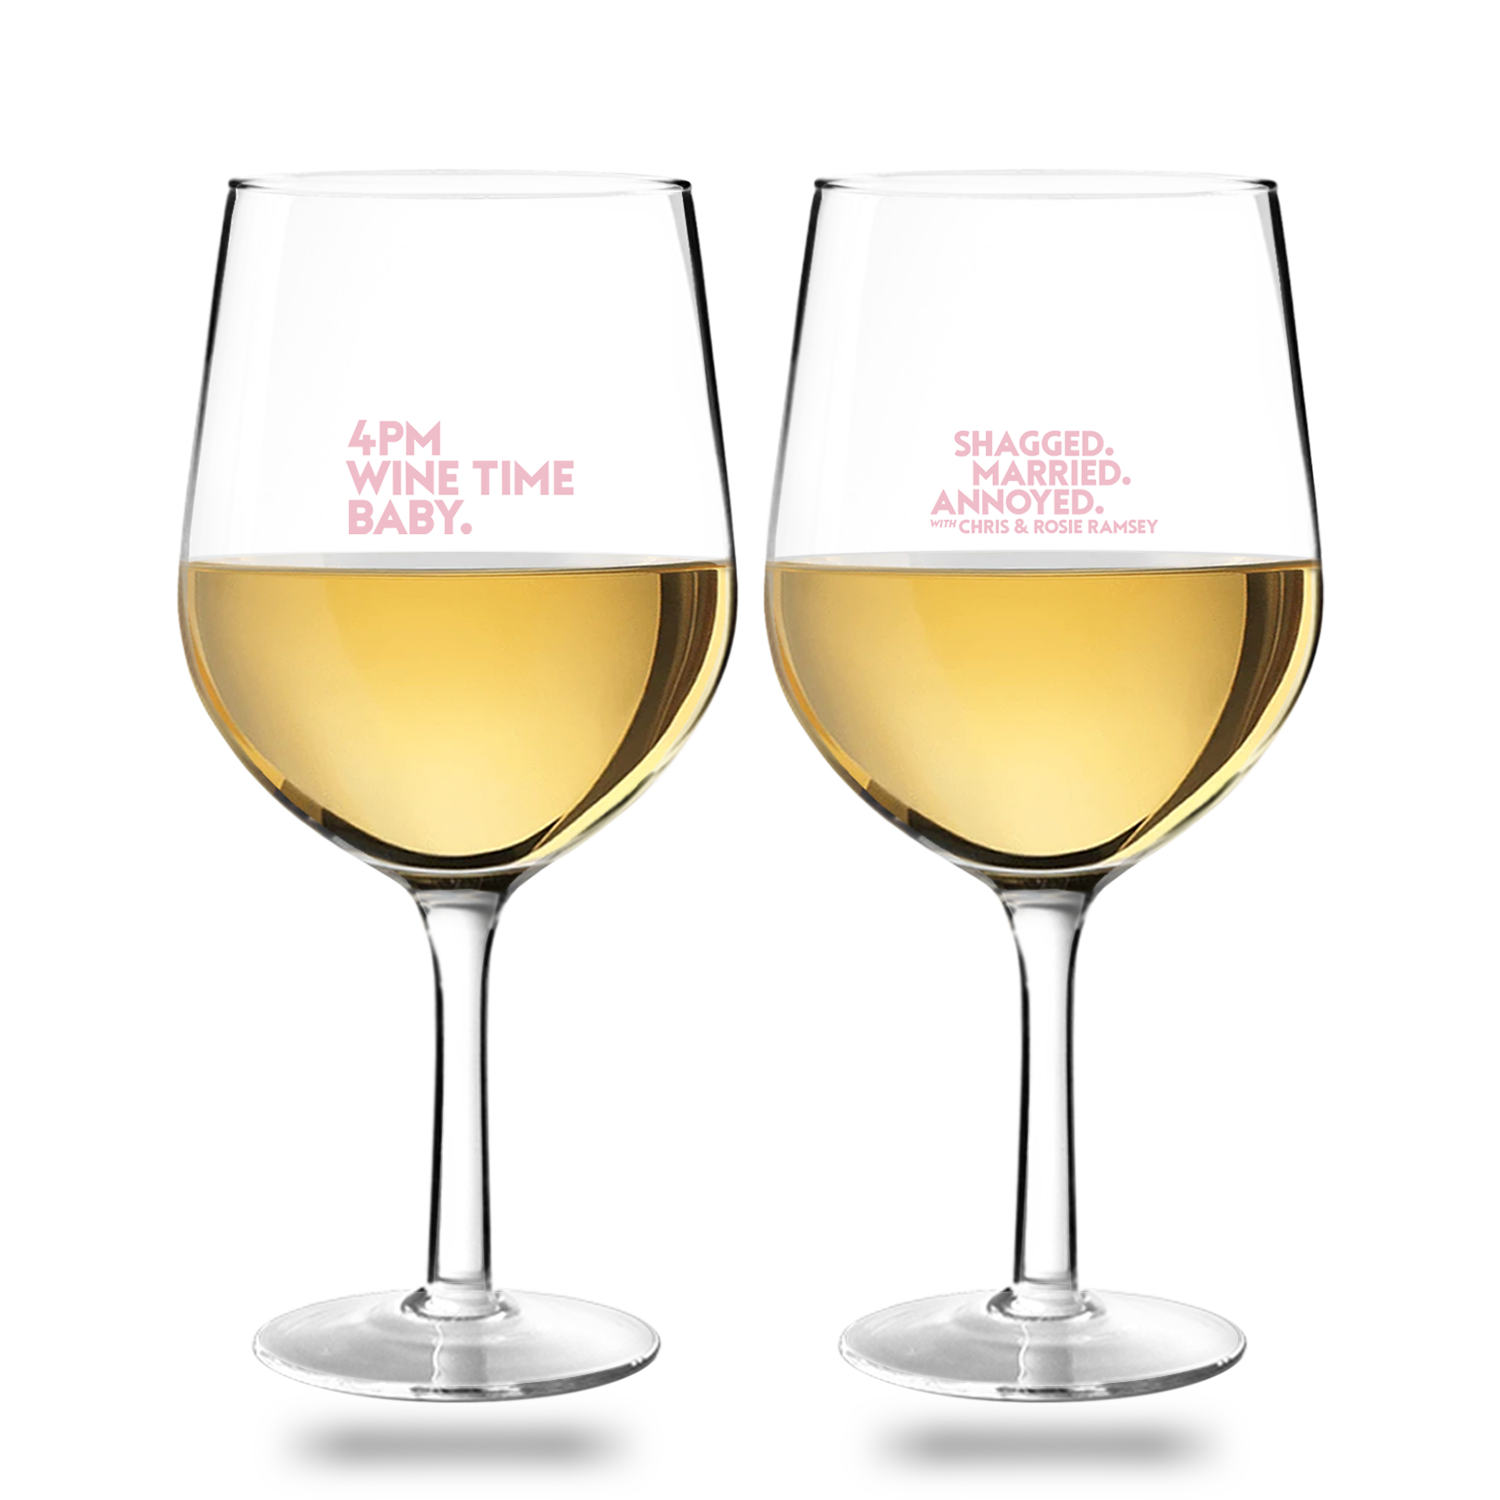 One Double-sided Printed EXTRA LARGE Wine Glass